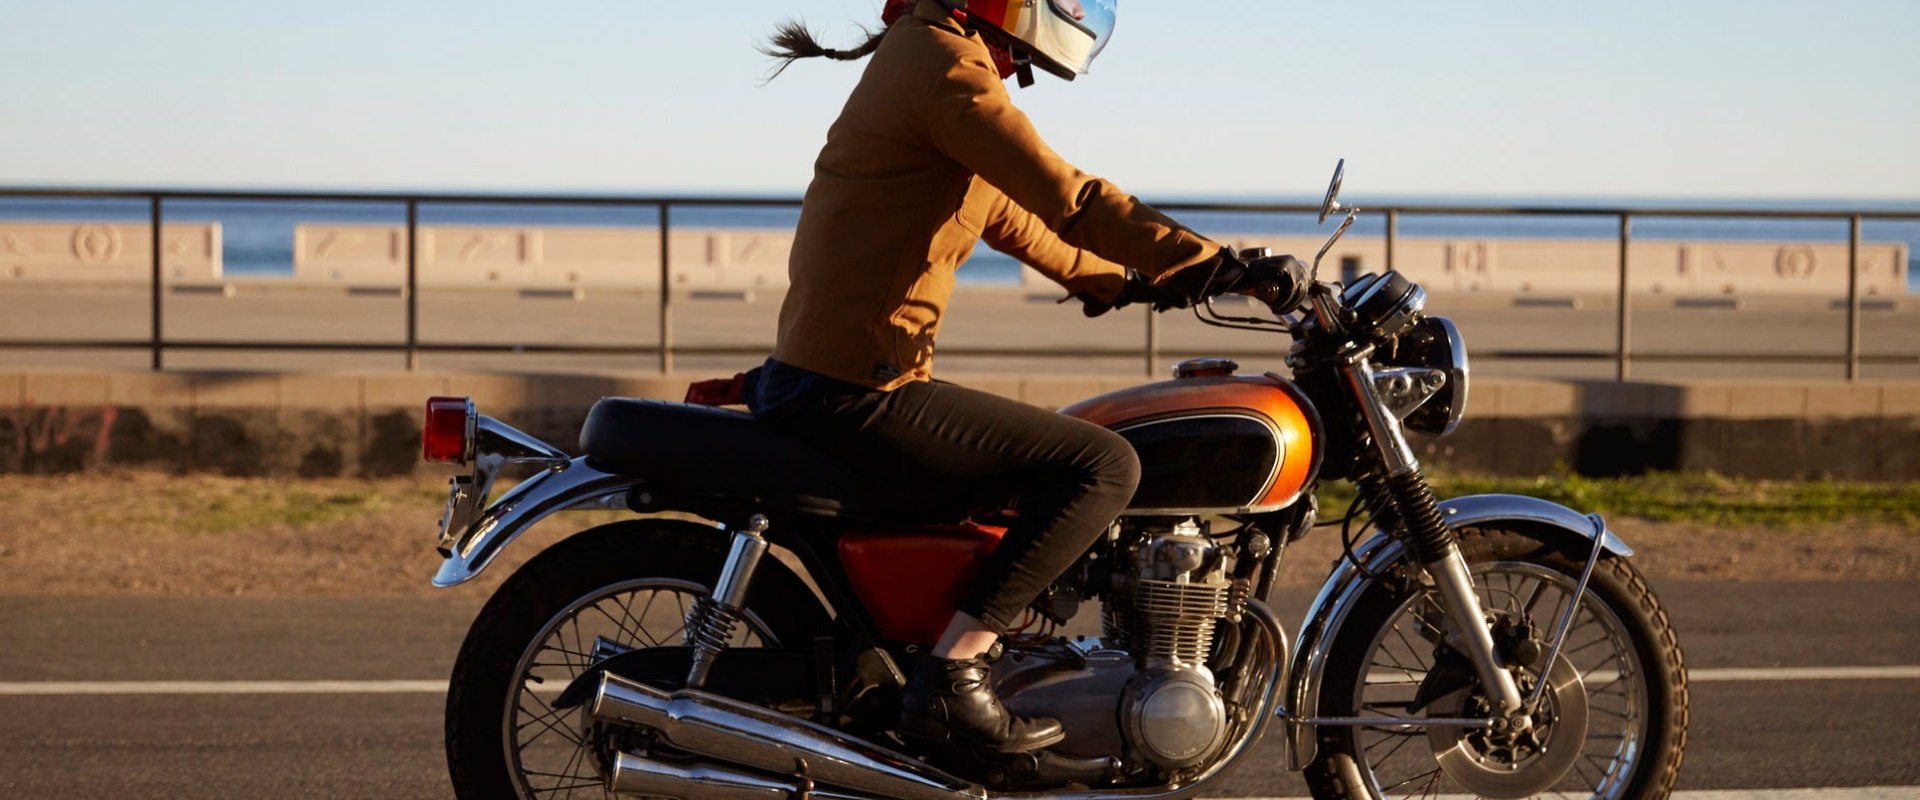 Safe rider motorcycle insurance for new owners